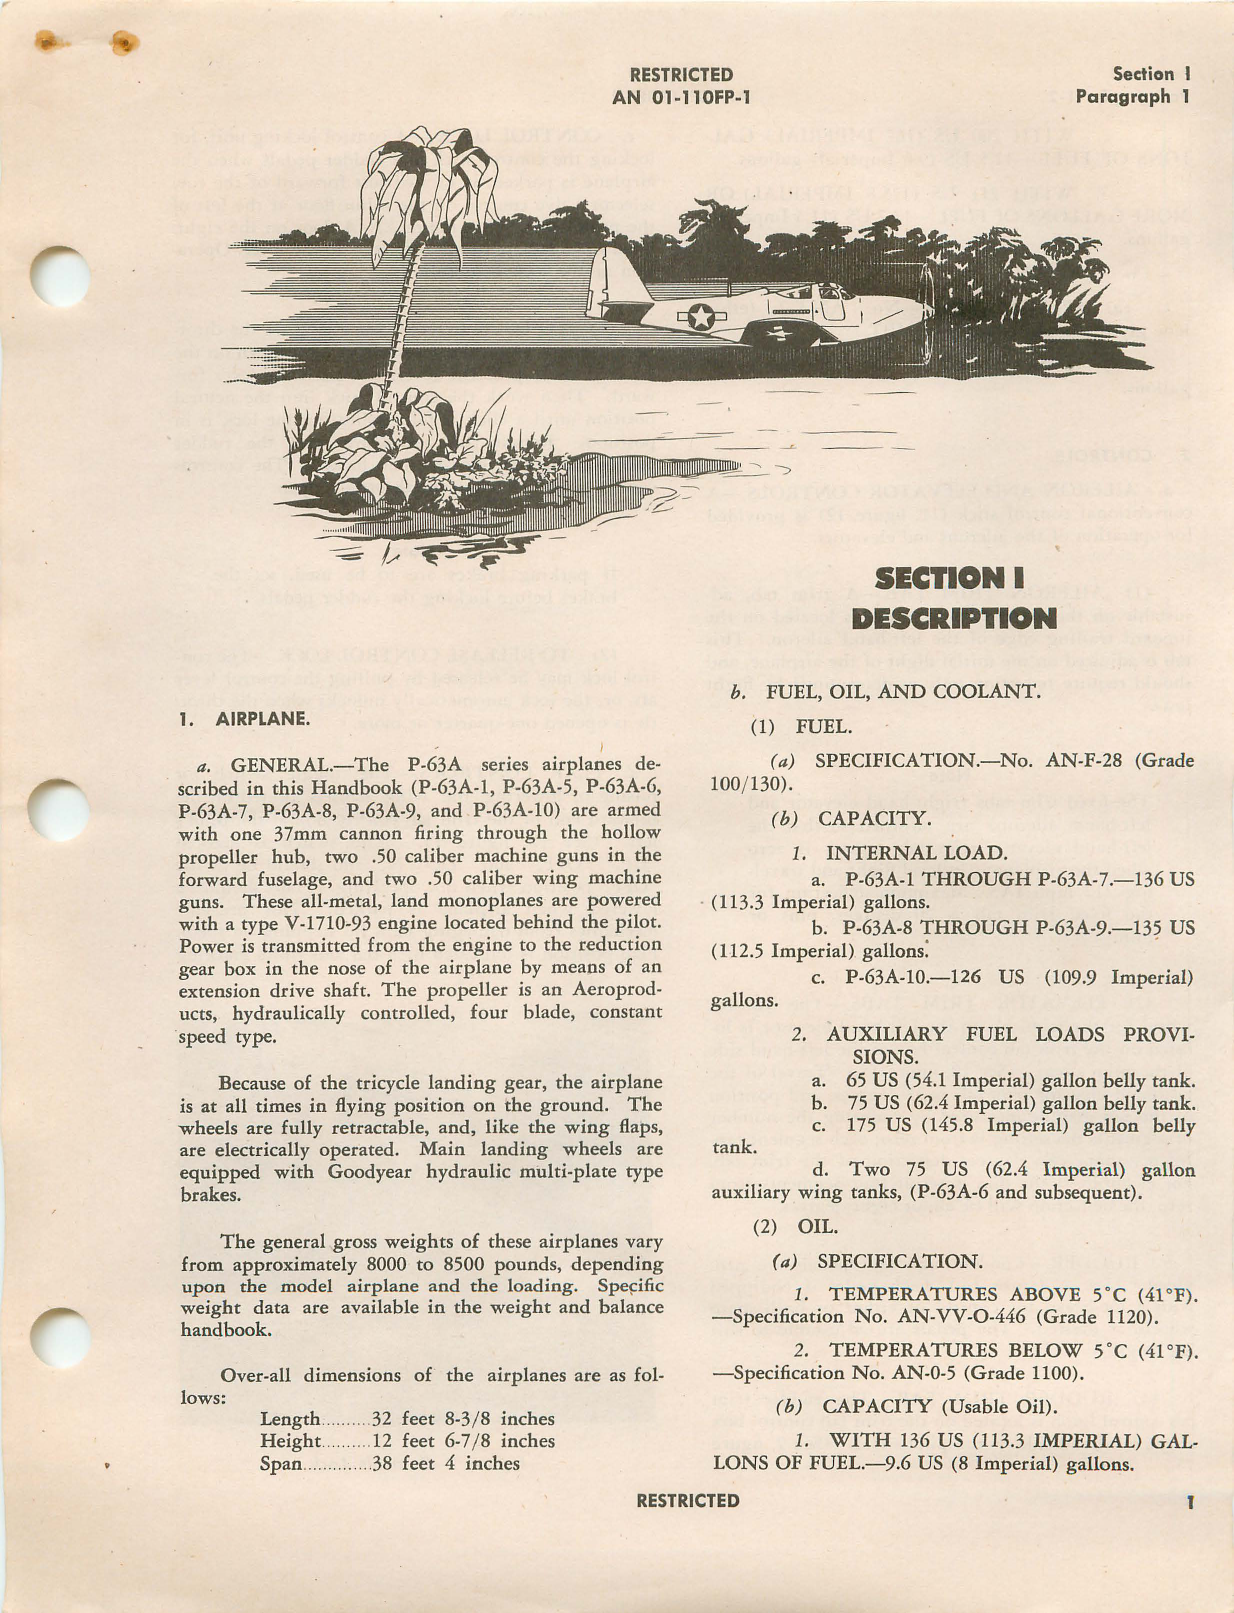 Sample page 5 from AirCorps Library document: Pilot's Flight Operating Instructions for P-63A-1, P-63A-5, P-63A-6, P-63A-7, P-63A-8, P-63A-9, P-63A-10